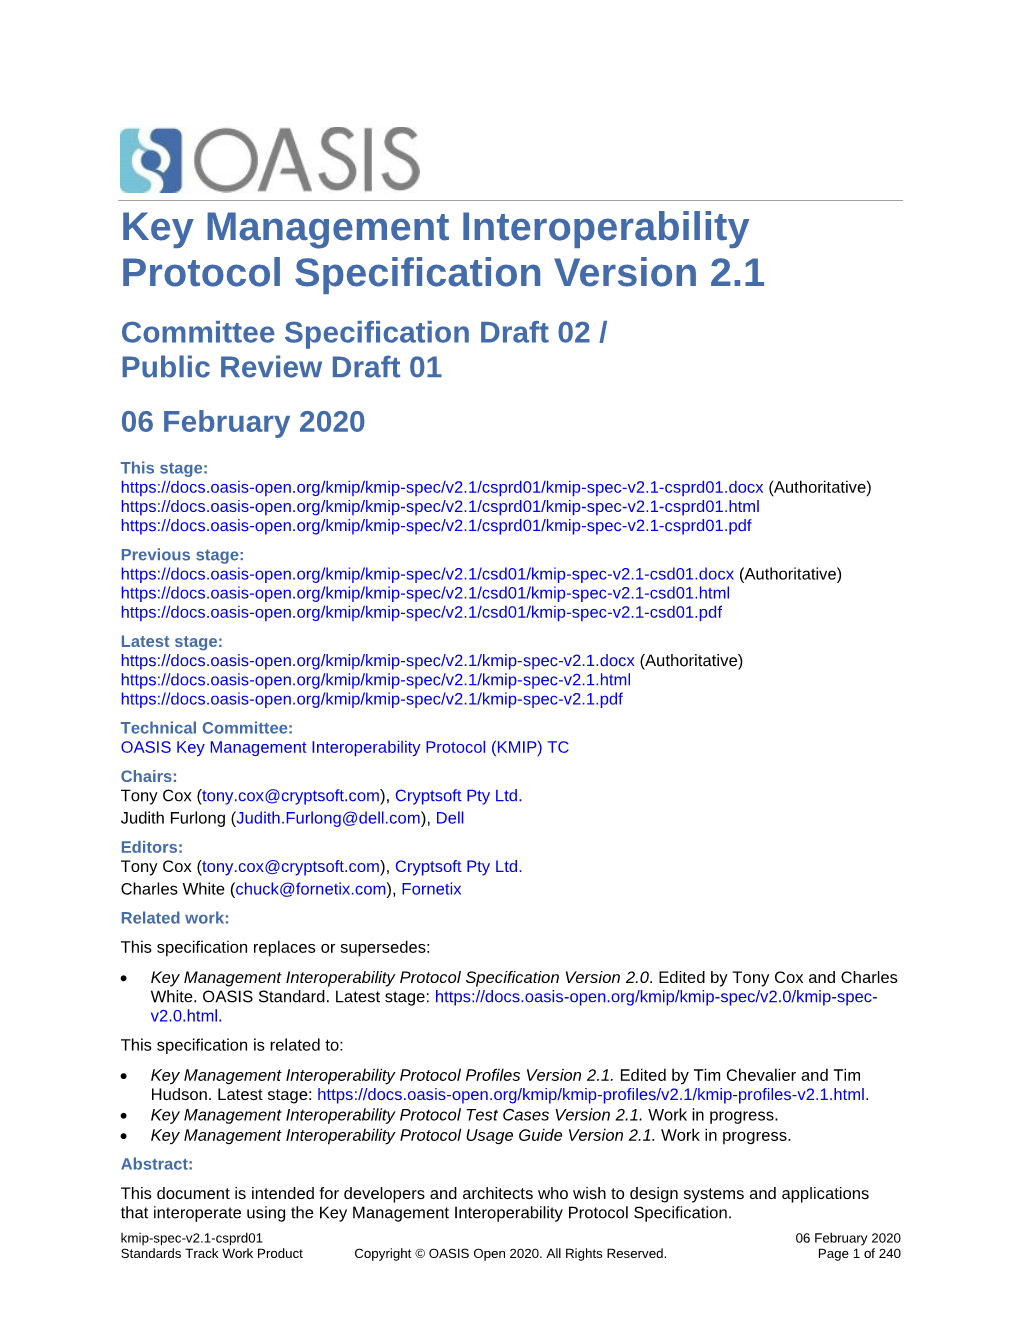 Key Management Interoperability Protocol Specification Version 2.1 Committee Specification Draft 02 / Public Review Draft 01 06 February 2020